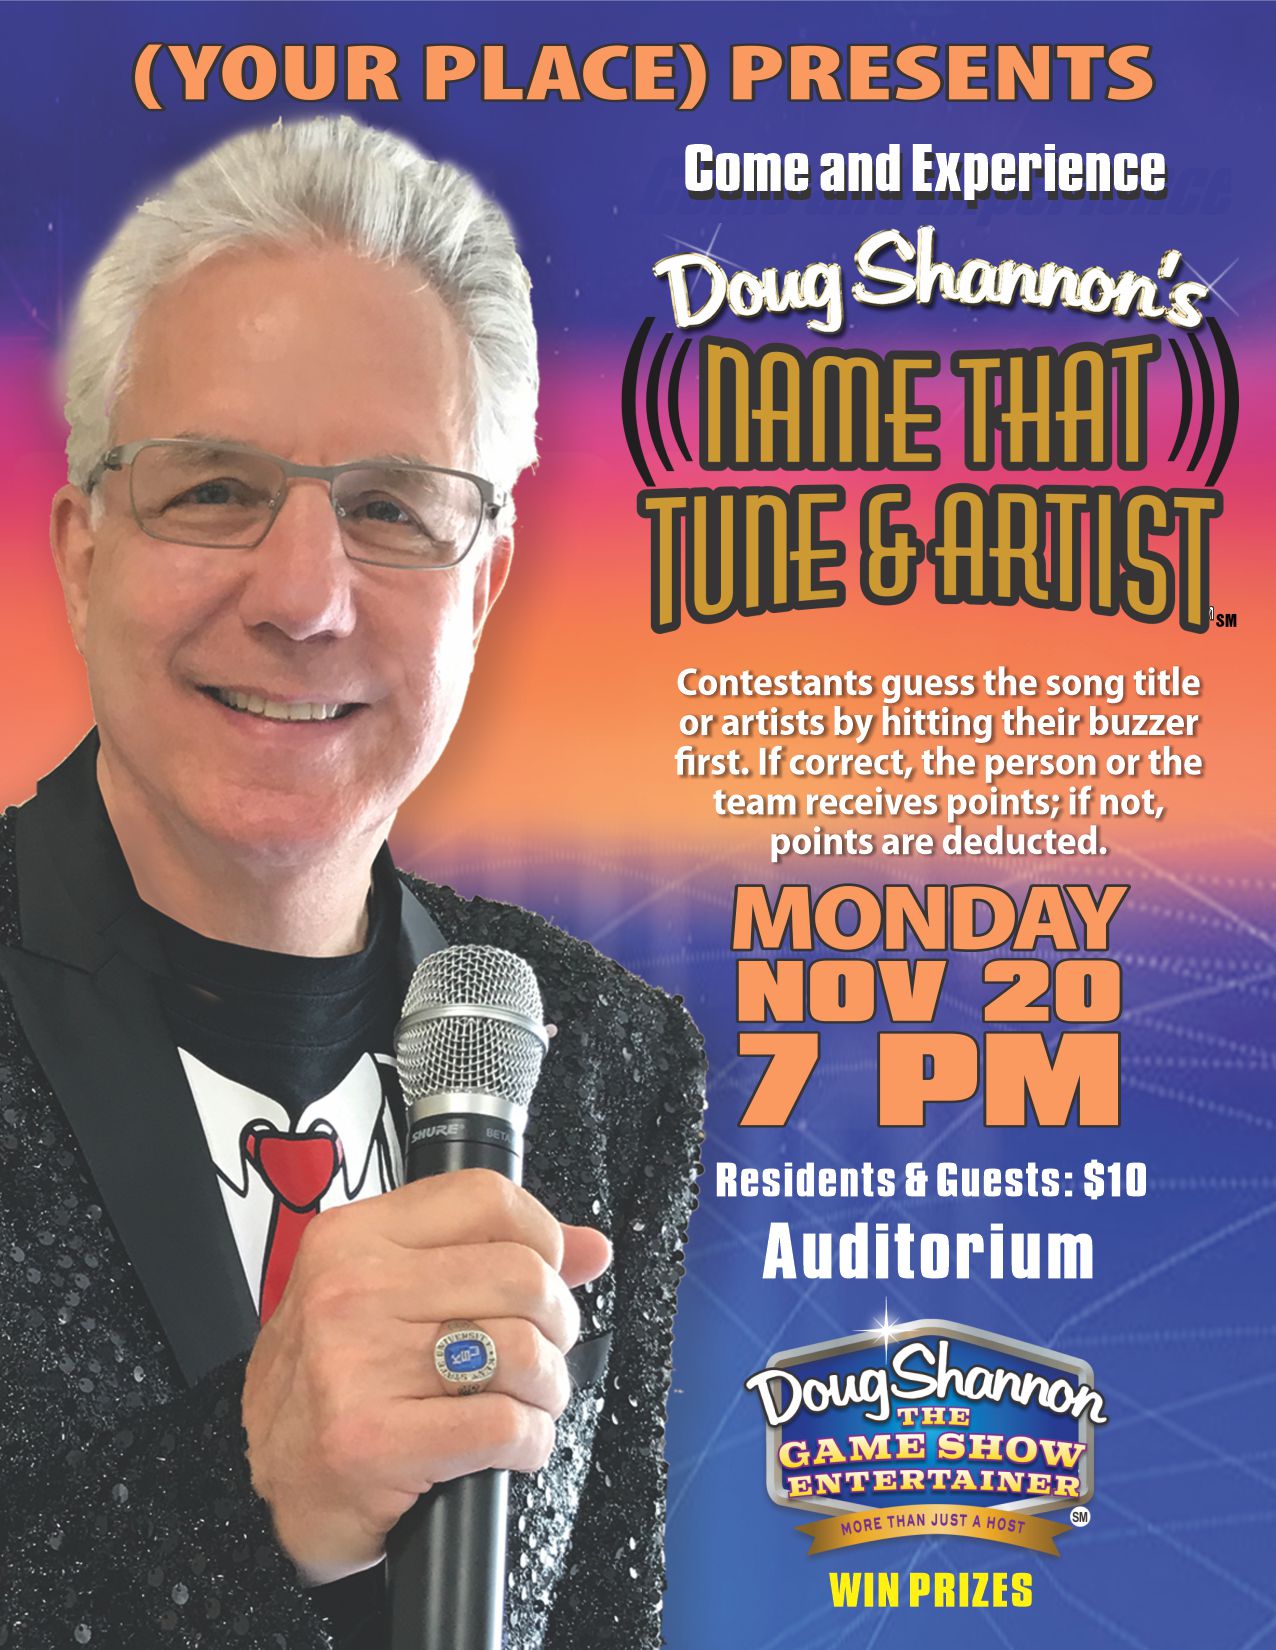 This image shows a sample of the flyer you can use to market the upcoming show online or in print for Doug Shannon's Name That Tune and Artist Game show.